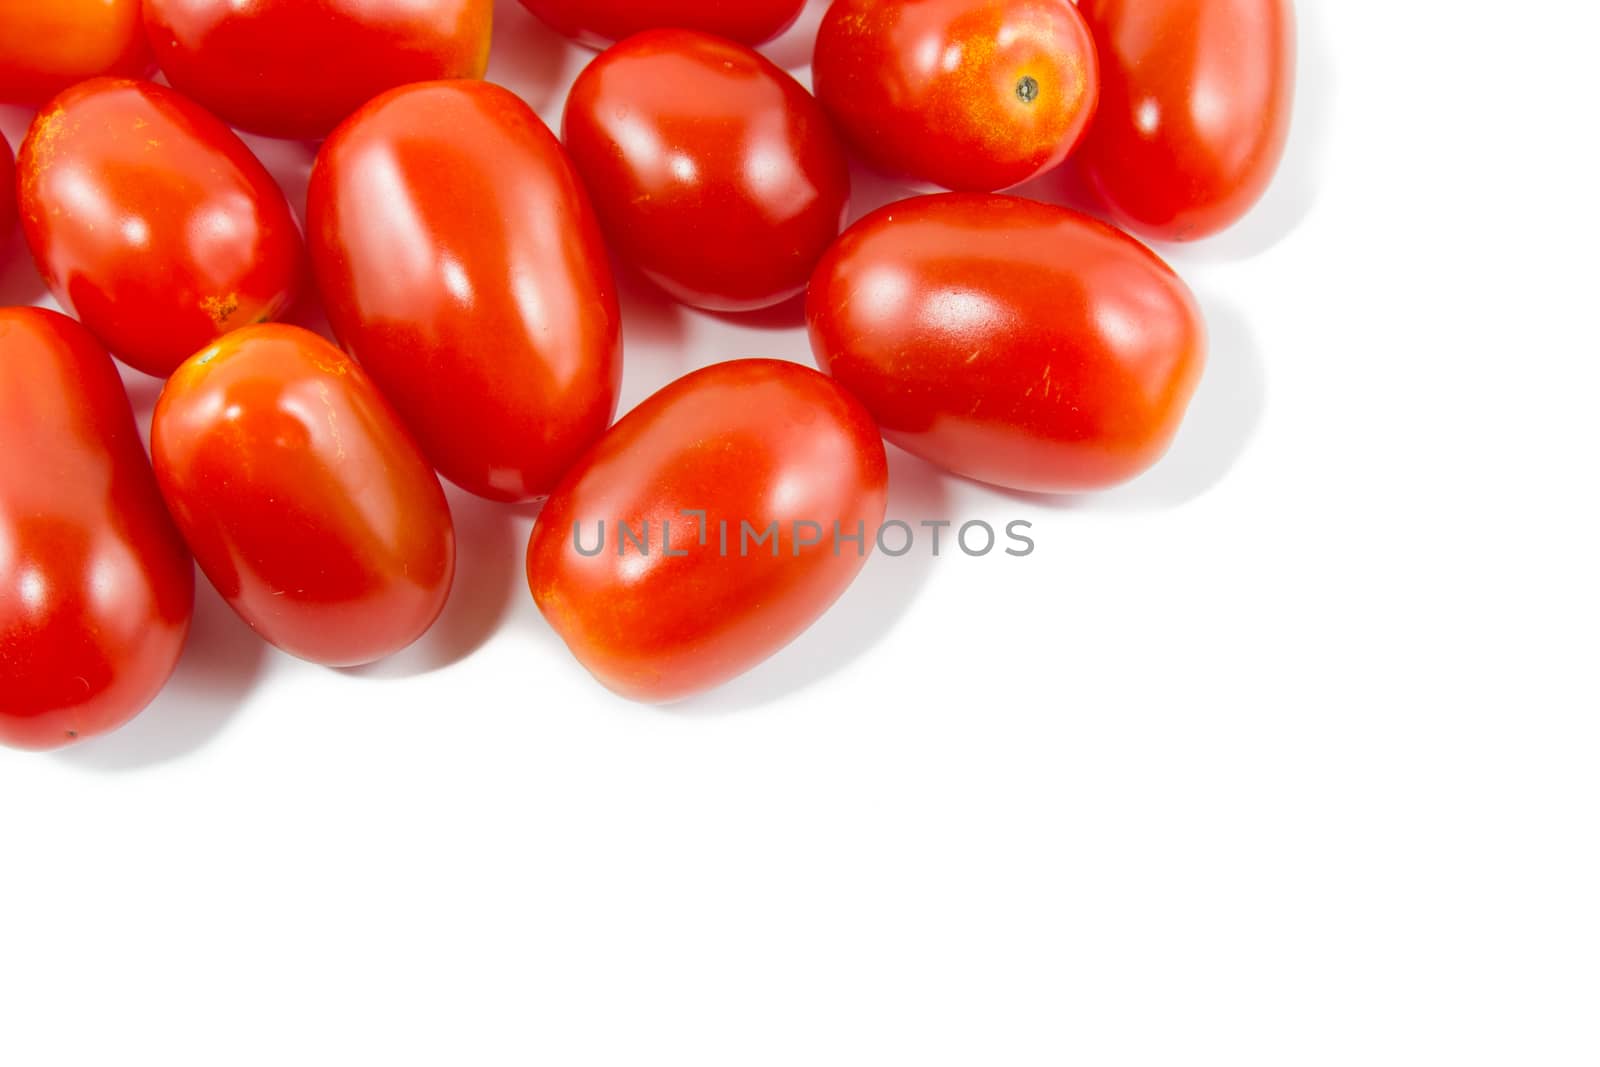 Group of cherry tomatoes by kasinv